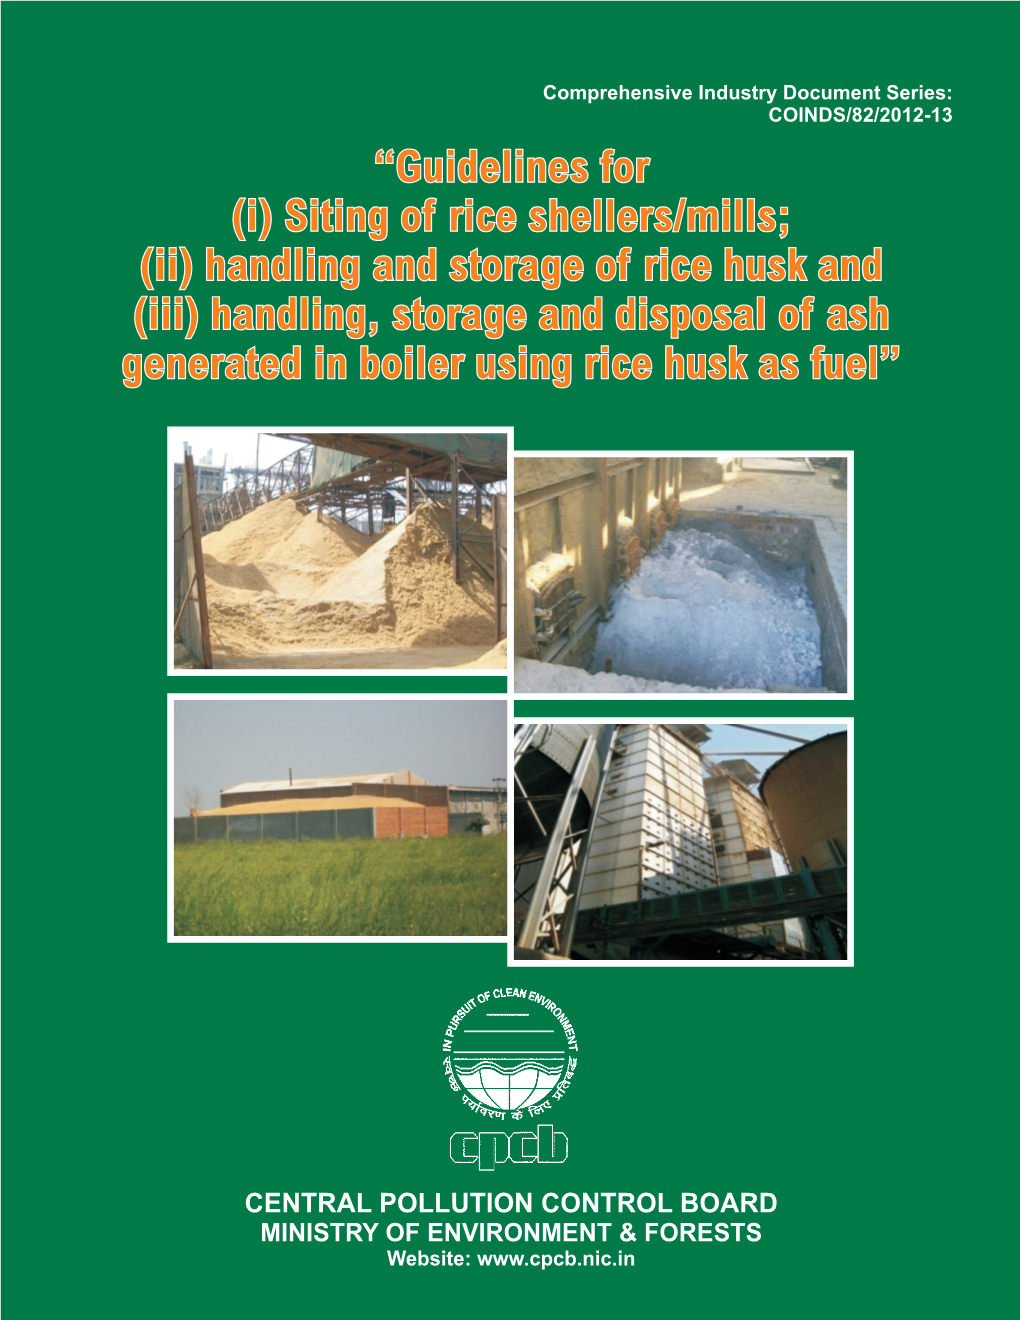 (I) Siting of Rice Shellers/Mills, (Ii) Handling and Storage of Rice Husk